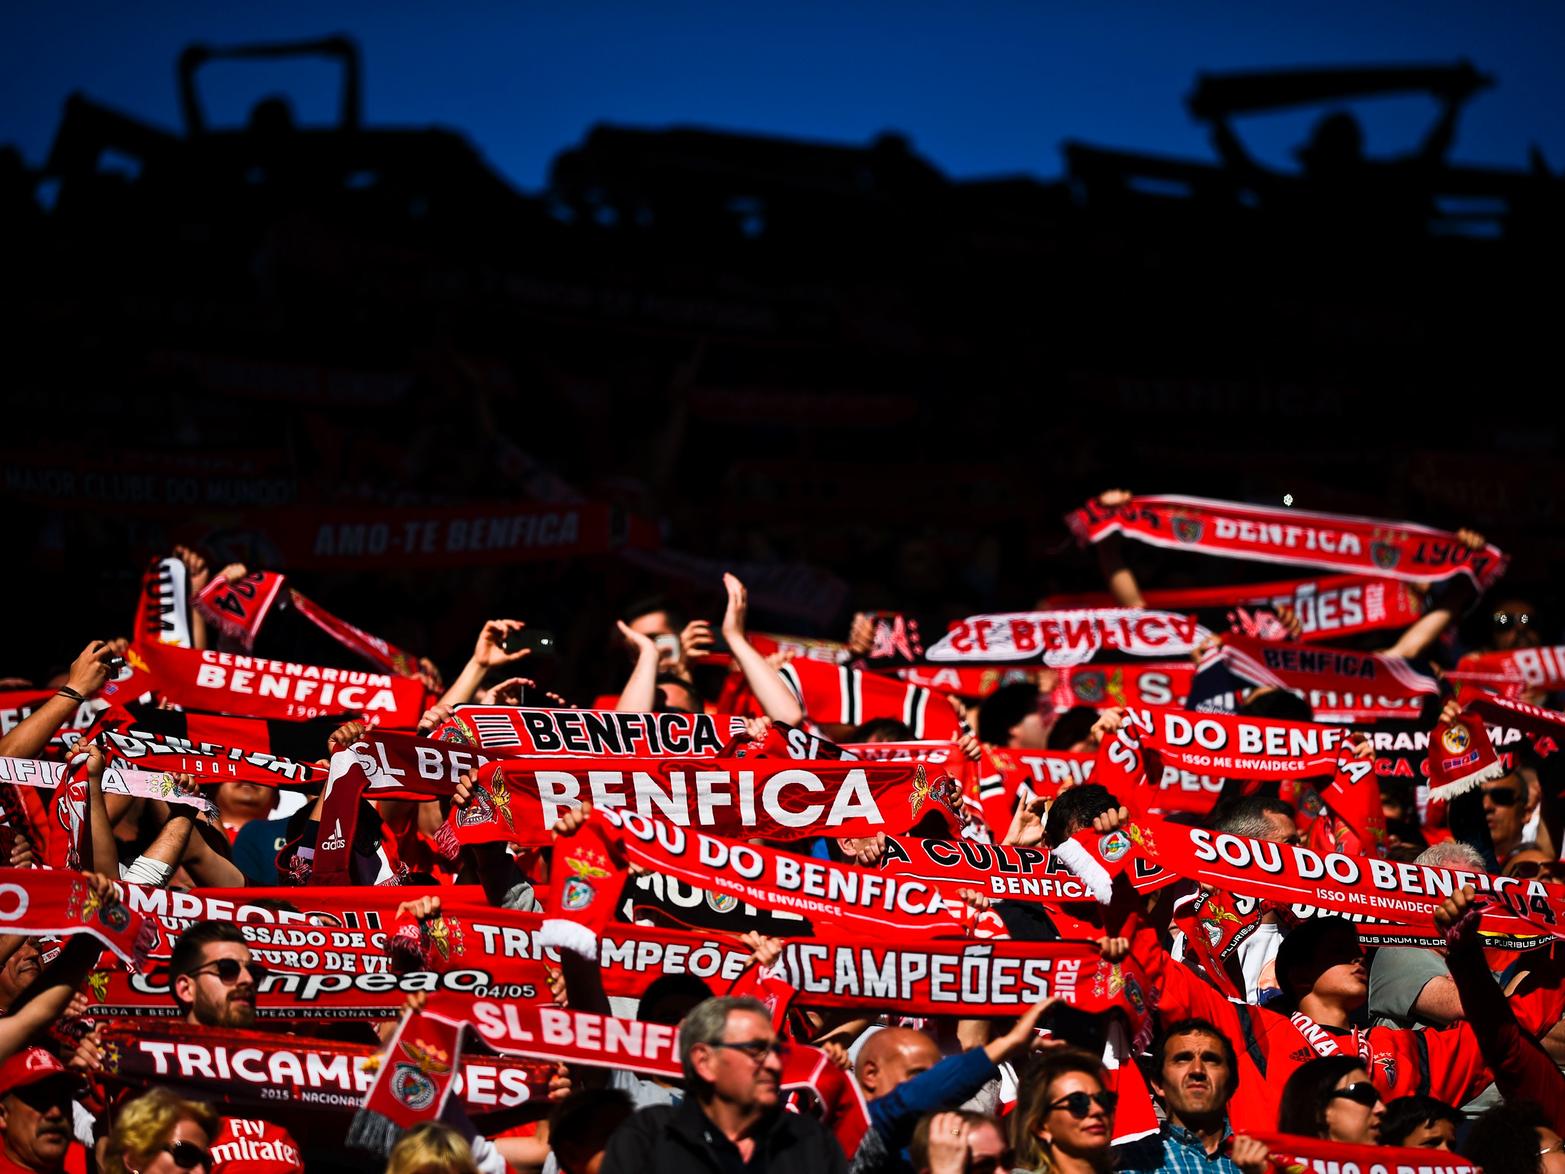 Sheffield Wednesday scouts are said to have overseen Benfica's 1-0 win over Vitoria Setuba last weekend, as the club continue to formulate plans for future transfer windows. (Sport Witness)